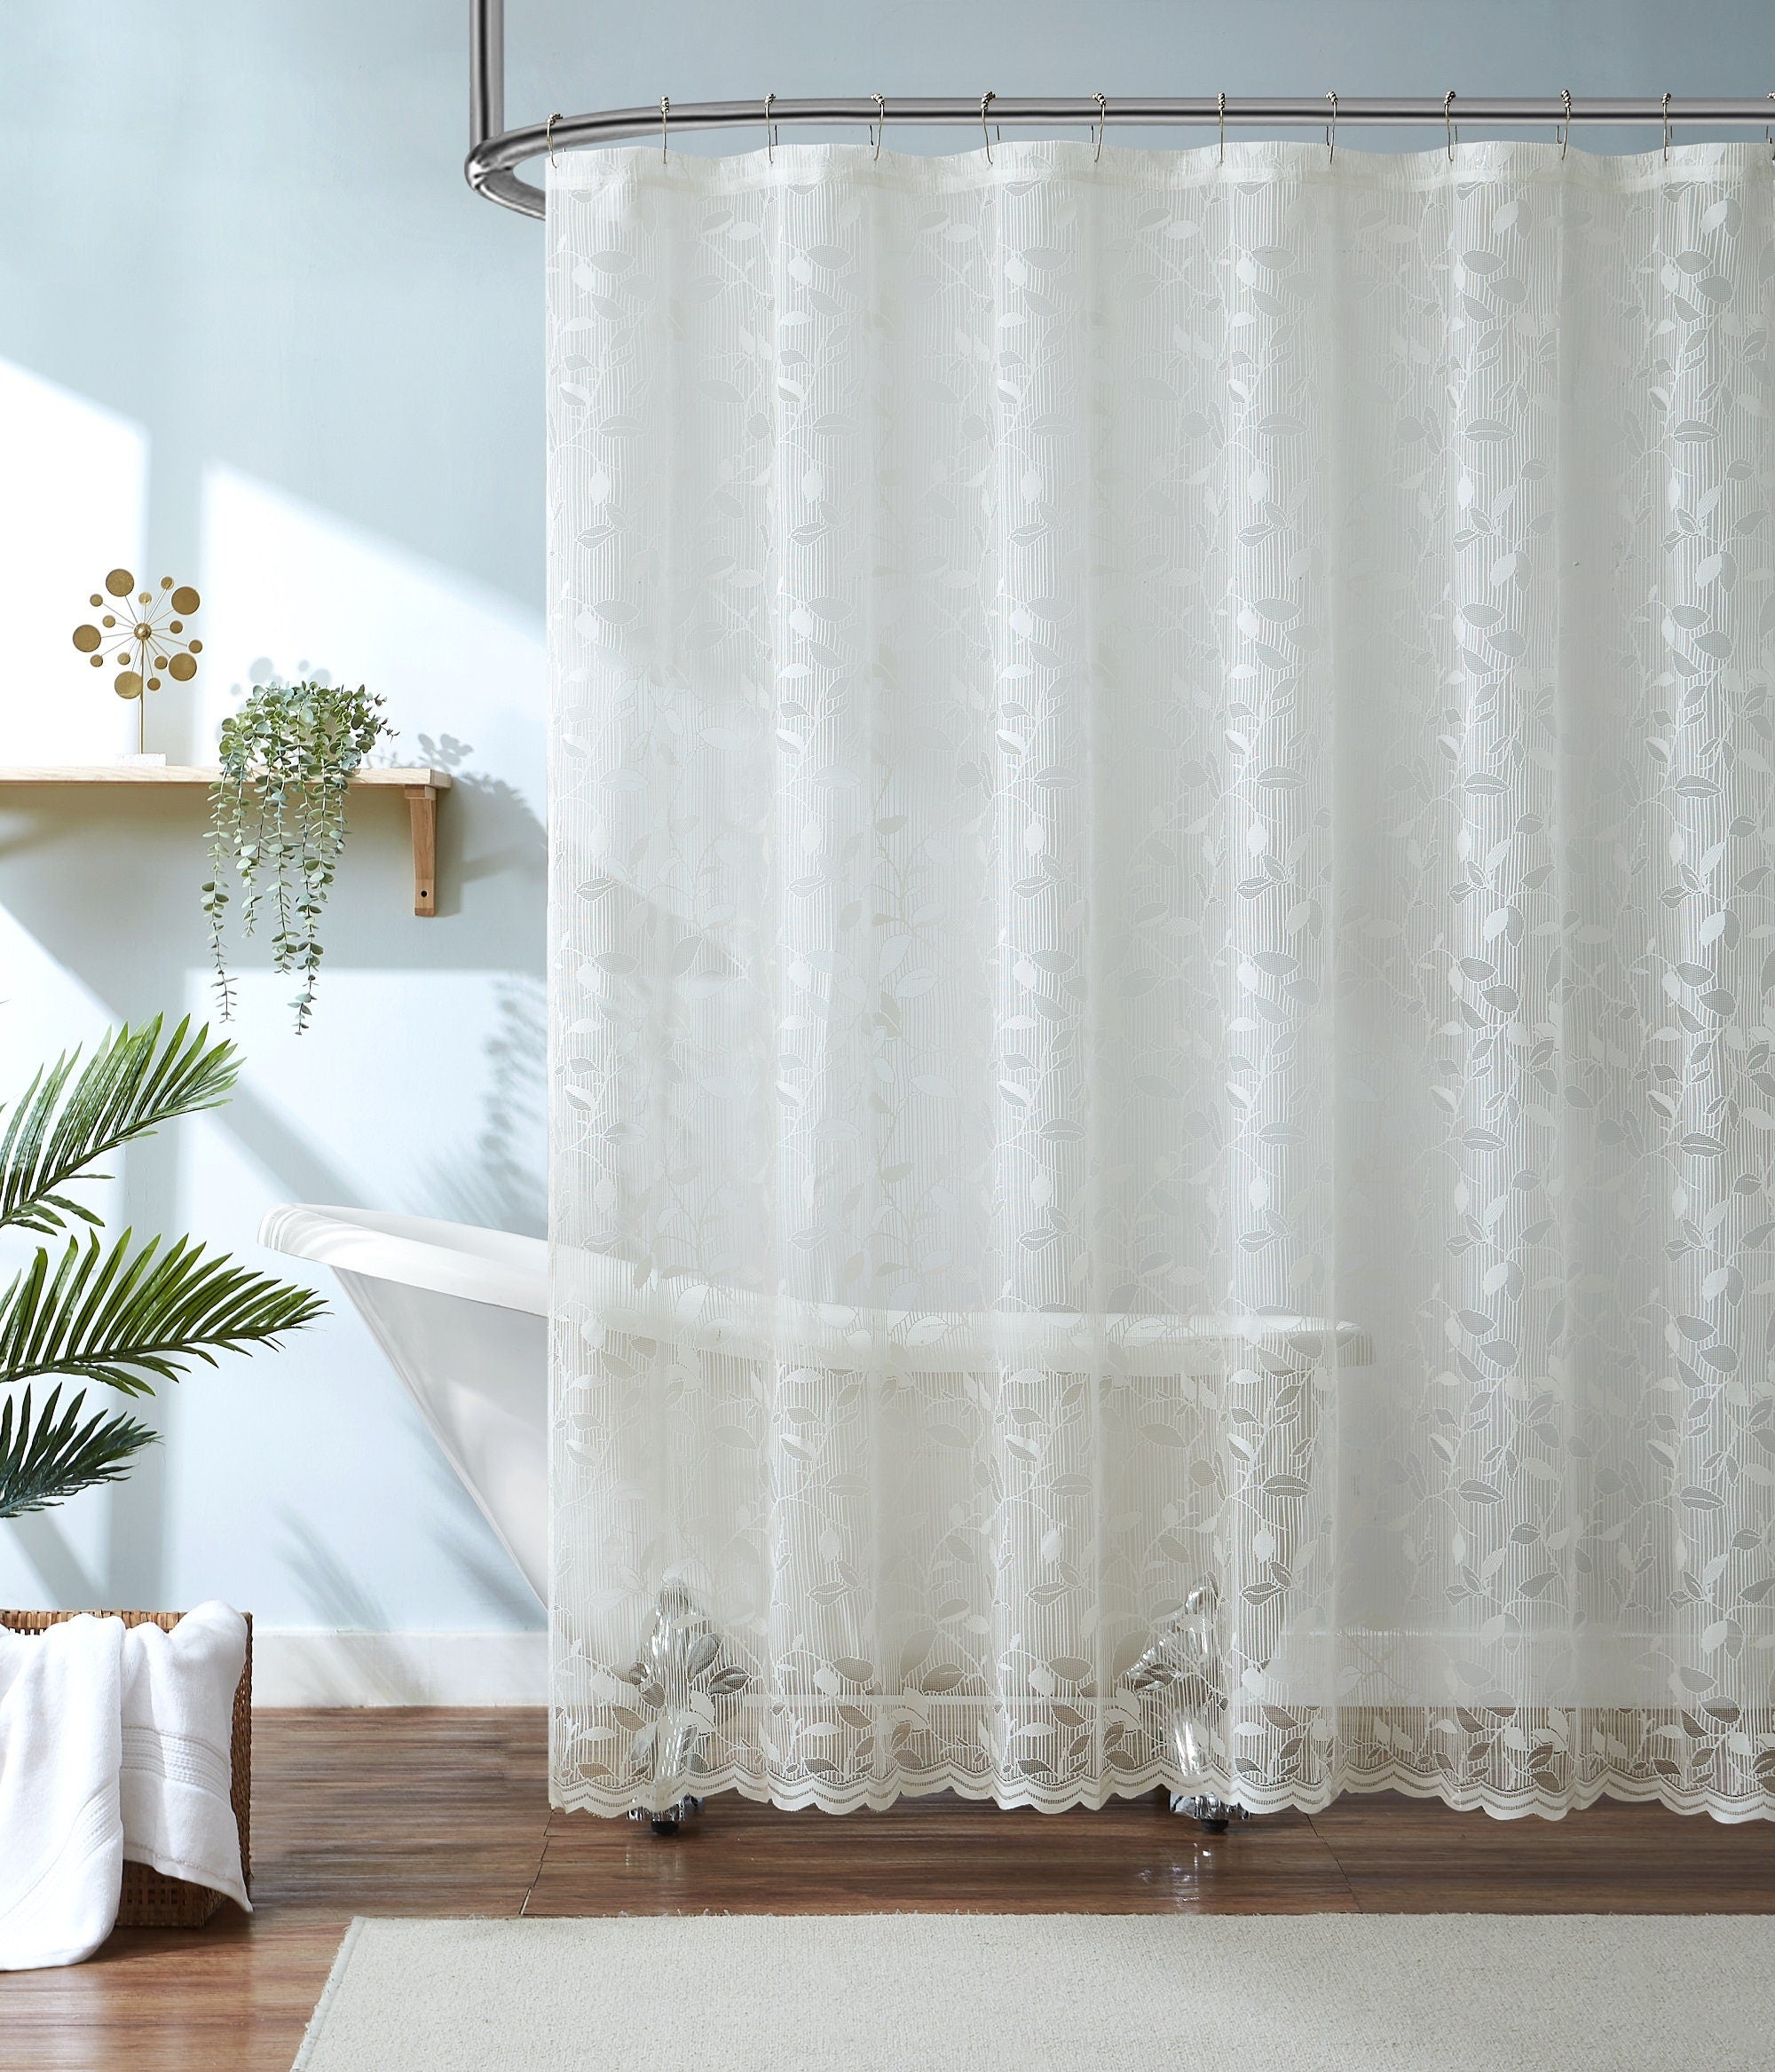 Modern Lace Shower Curtain with Leaf Design in Colors  Sizes 